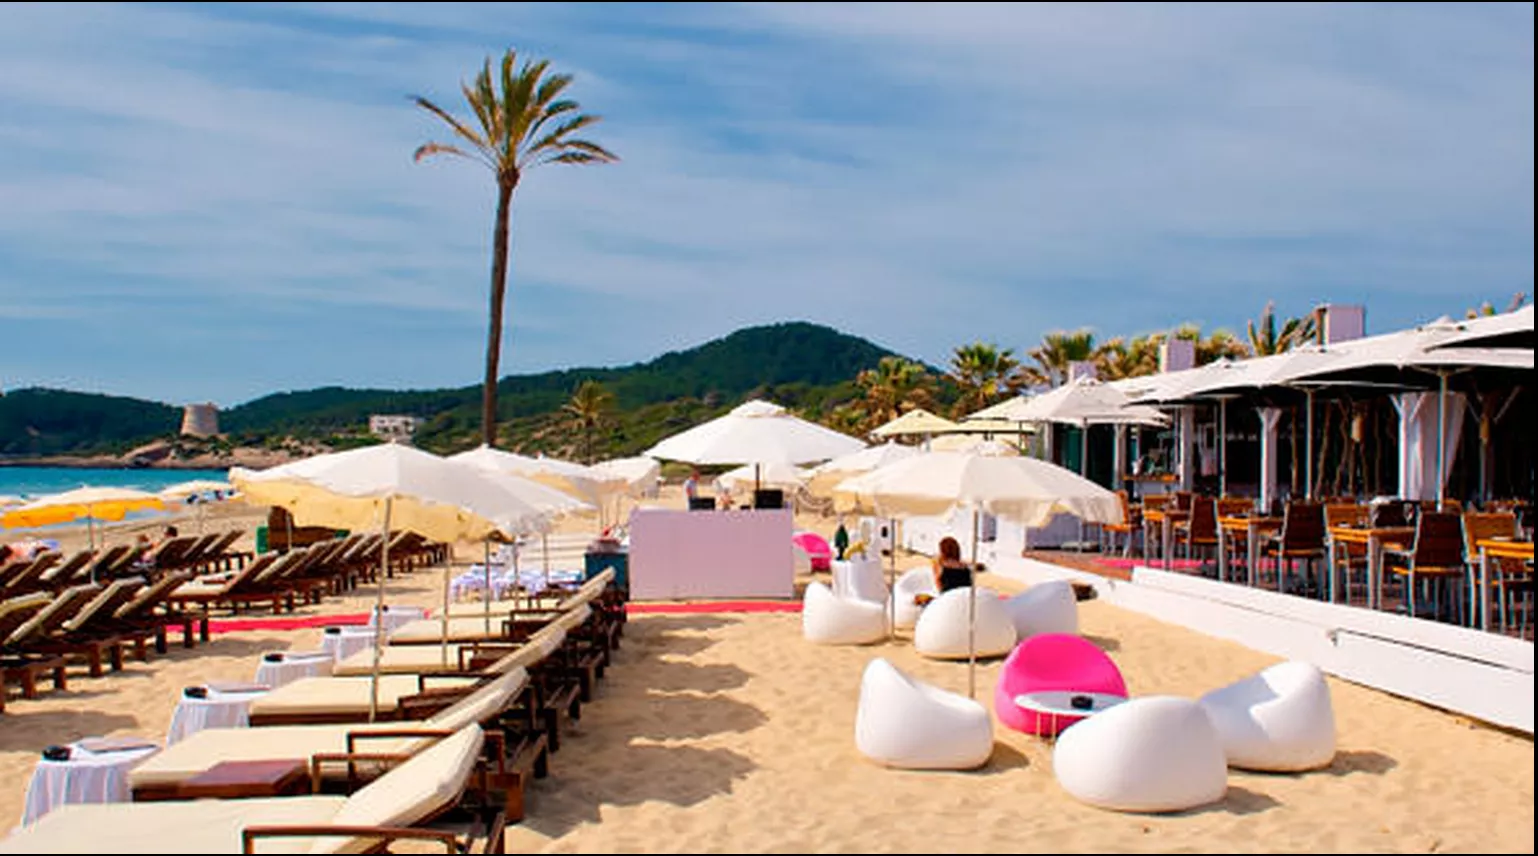 Nassau Beach Club in Spain, Europe | Day and Beach Clubs - Rated 4.1